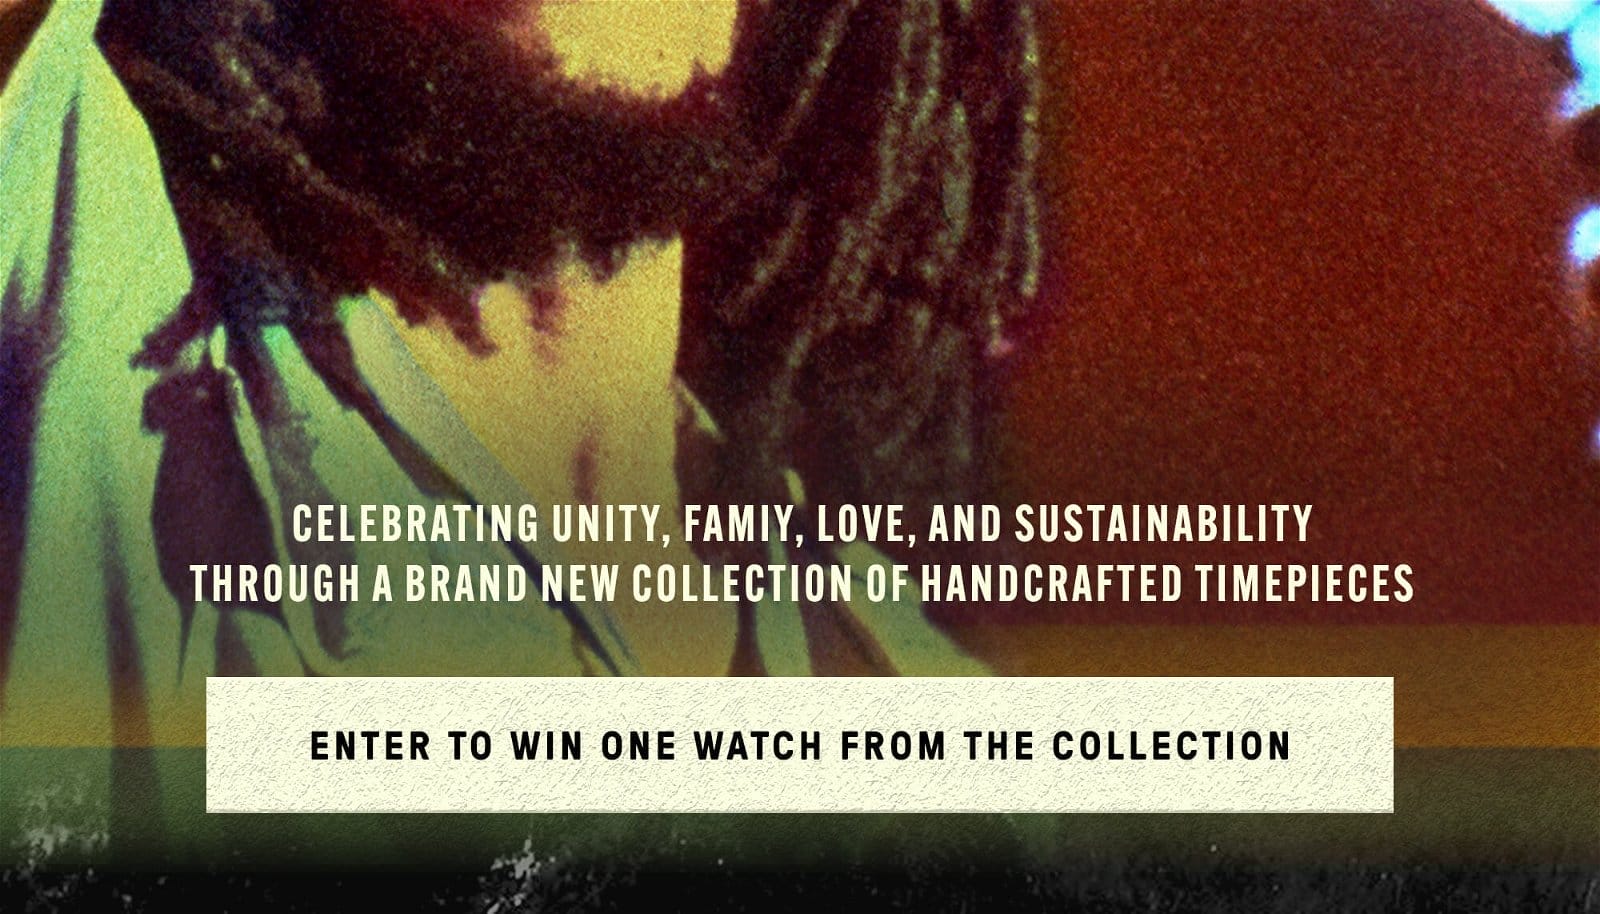 Original Grain x Bob Marley - Enter to win one watch from the collection